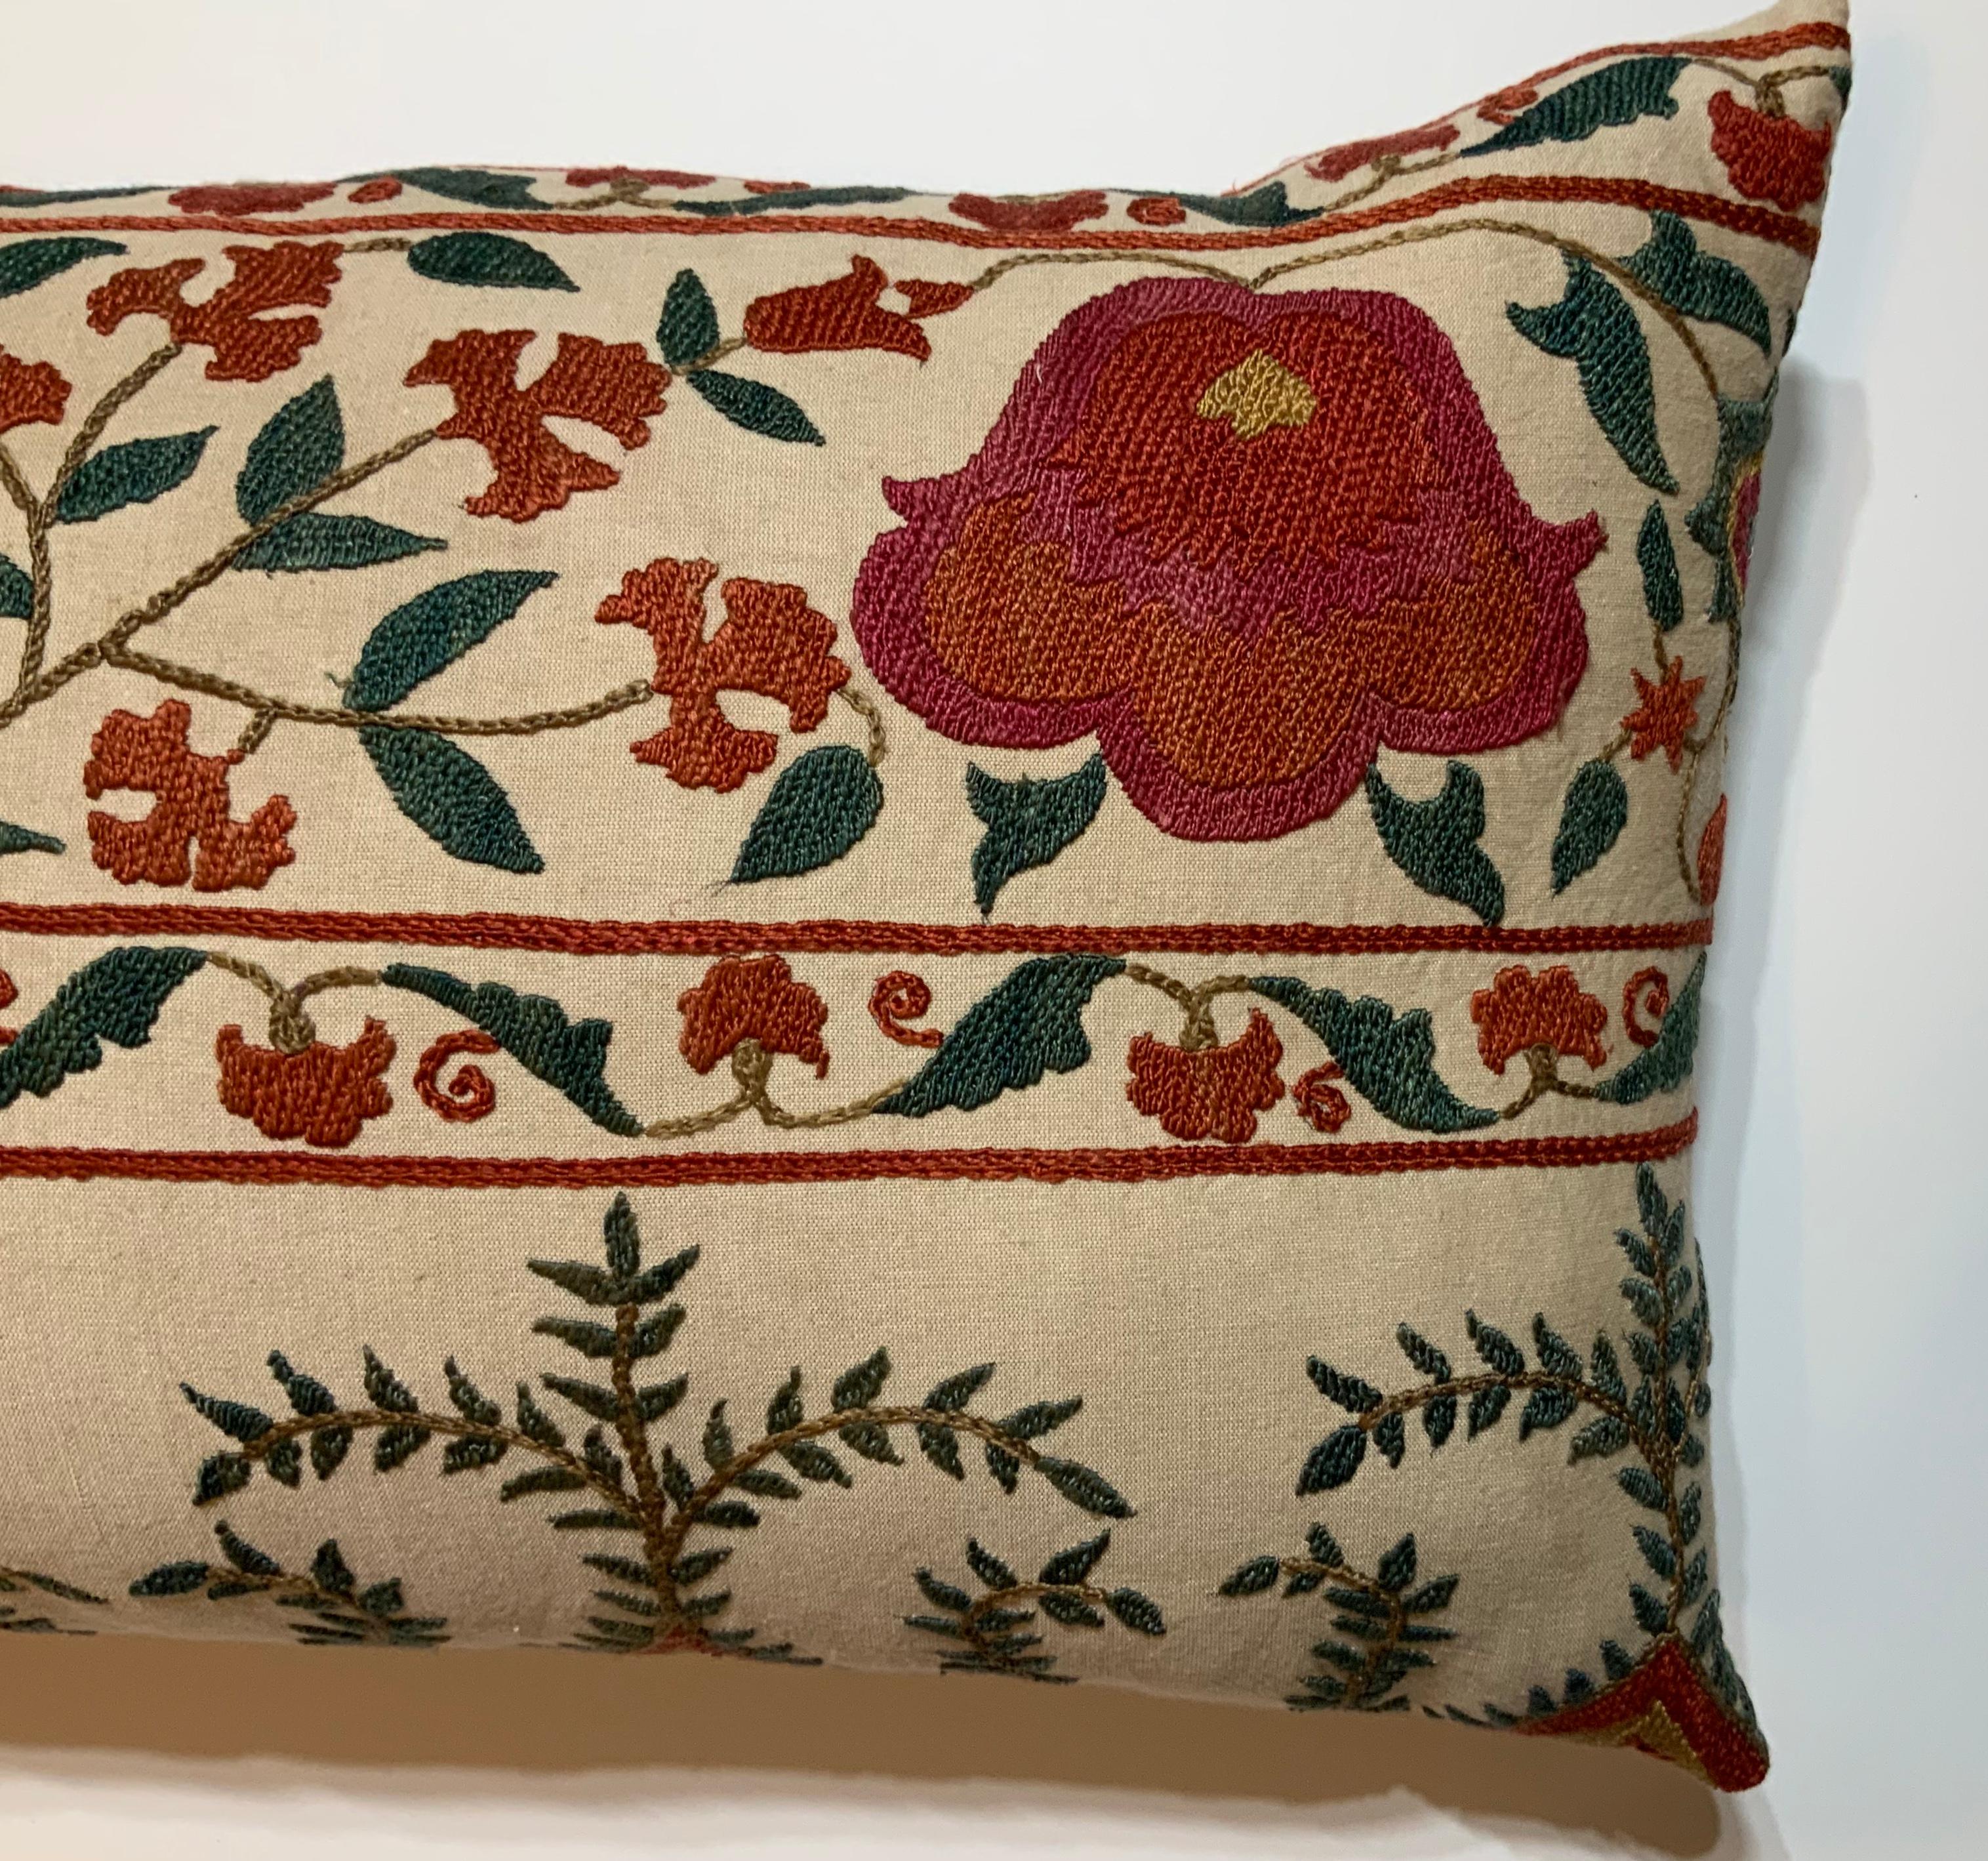 Beautiful pillow made of hand embroidery silk, on cream color background, exceptional flowers and vine motifs all around, linen backing, fresh new insert.